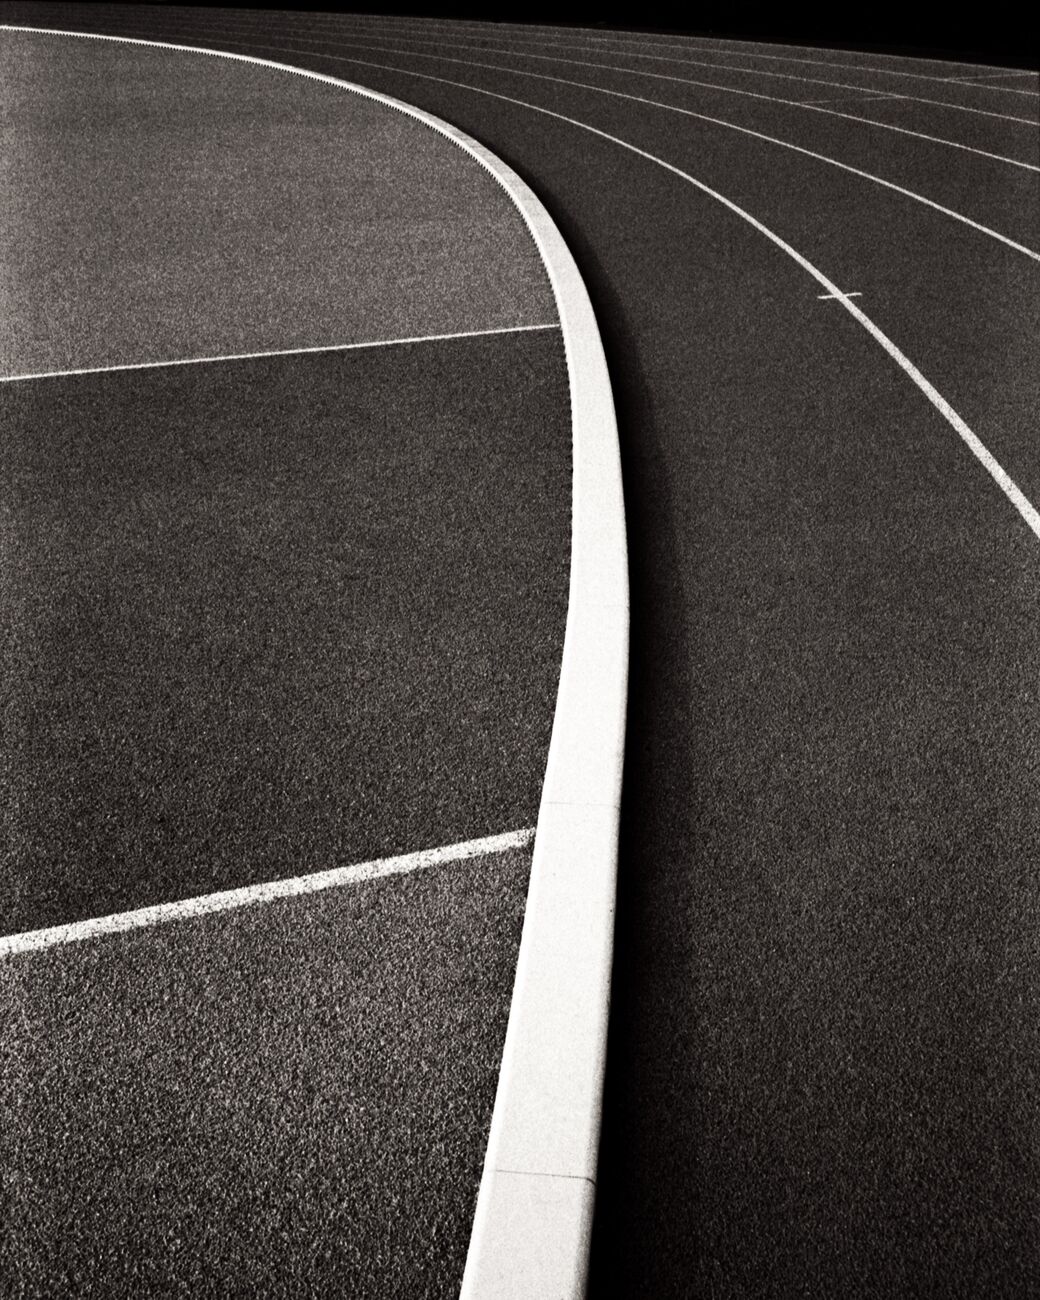 Photography 14.2 x 17.7 in, Running Track. Ref-11621-4 - Denis Olivier Photography